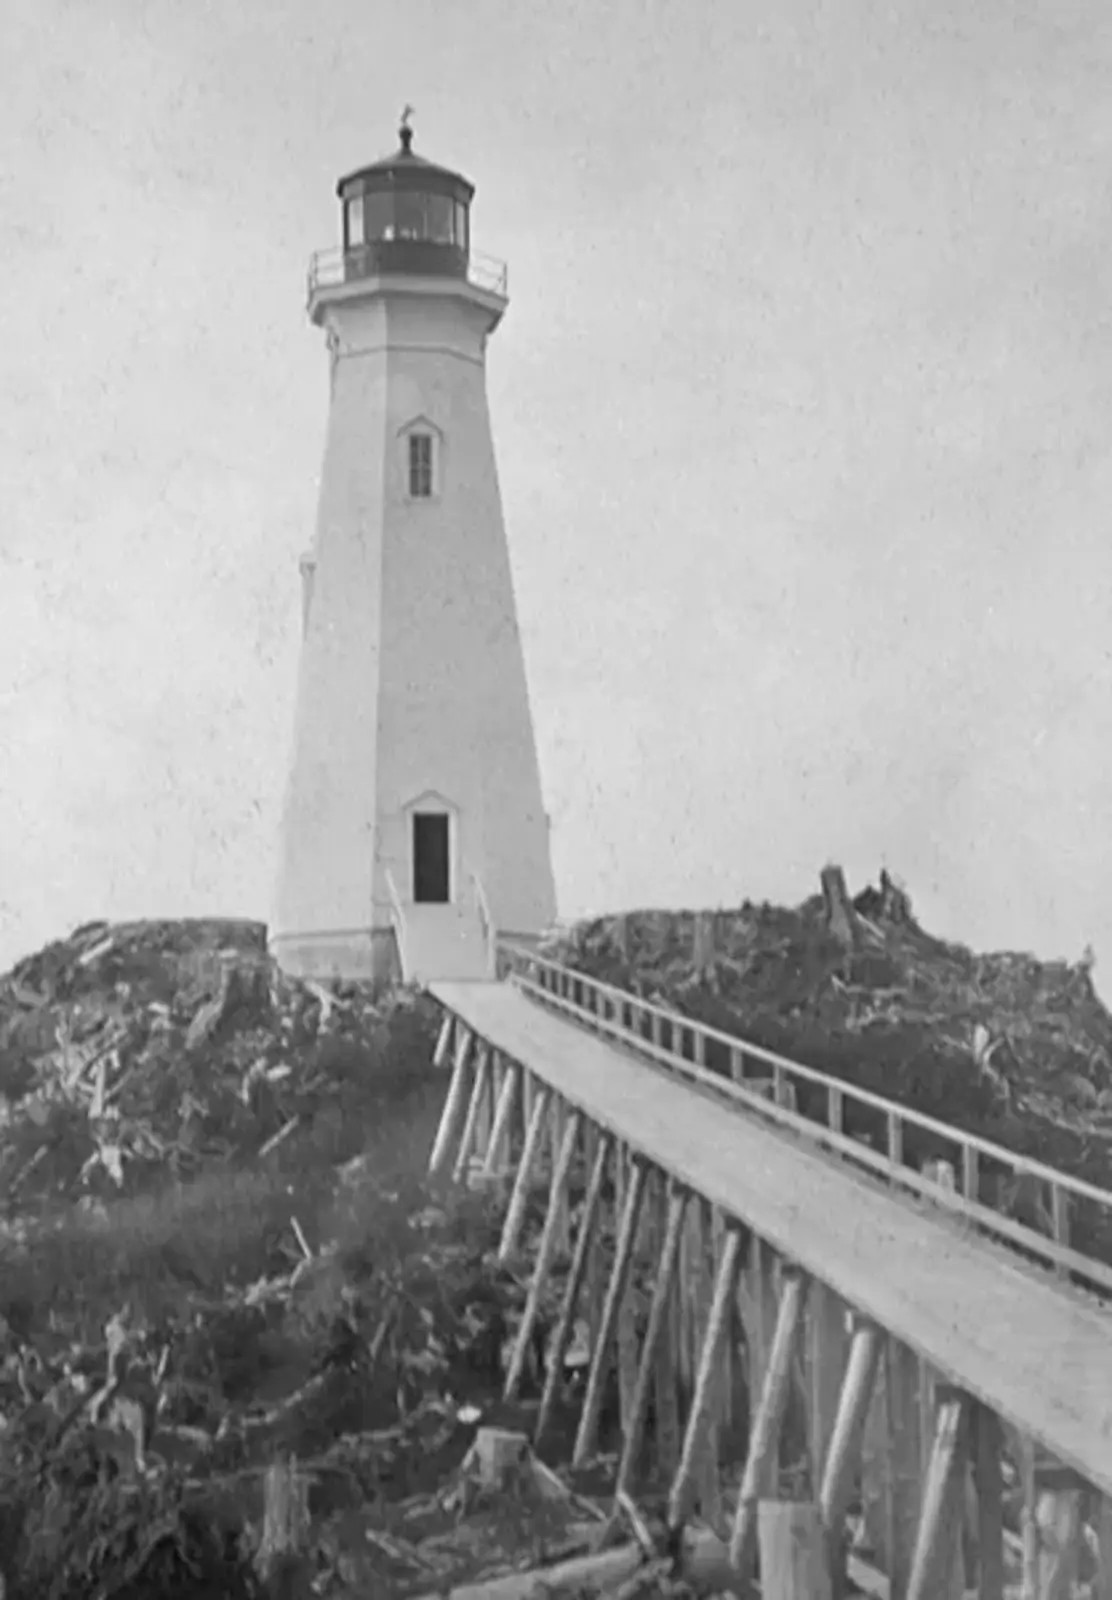 Lawyer Islands Lighthouse in 1912